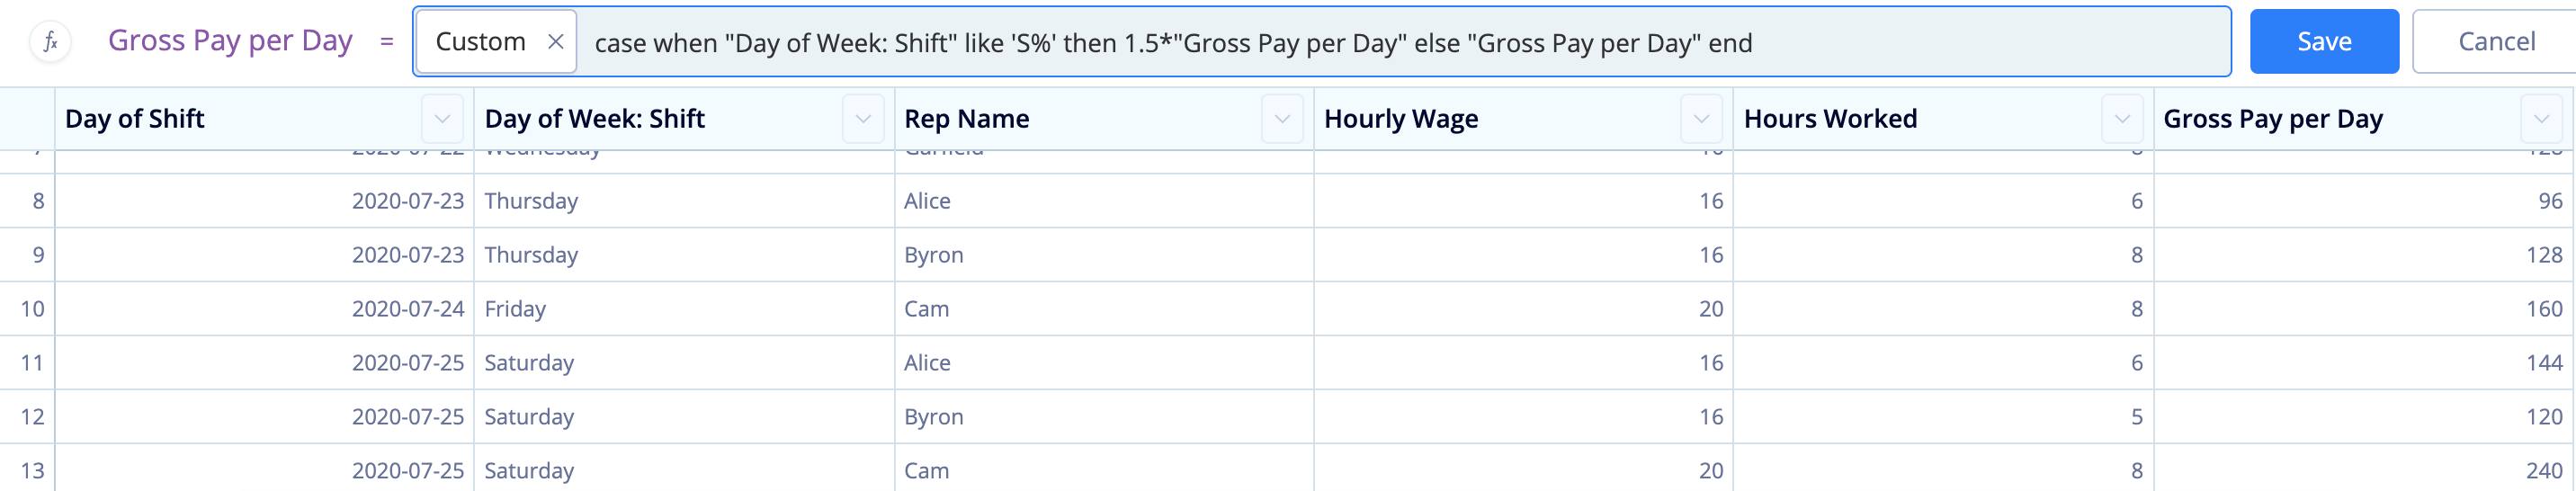 Calculate the overtime pay by multiplying the base pay by 1.5 if the employee worked on a weekend